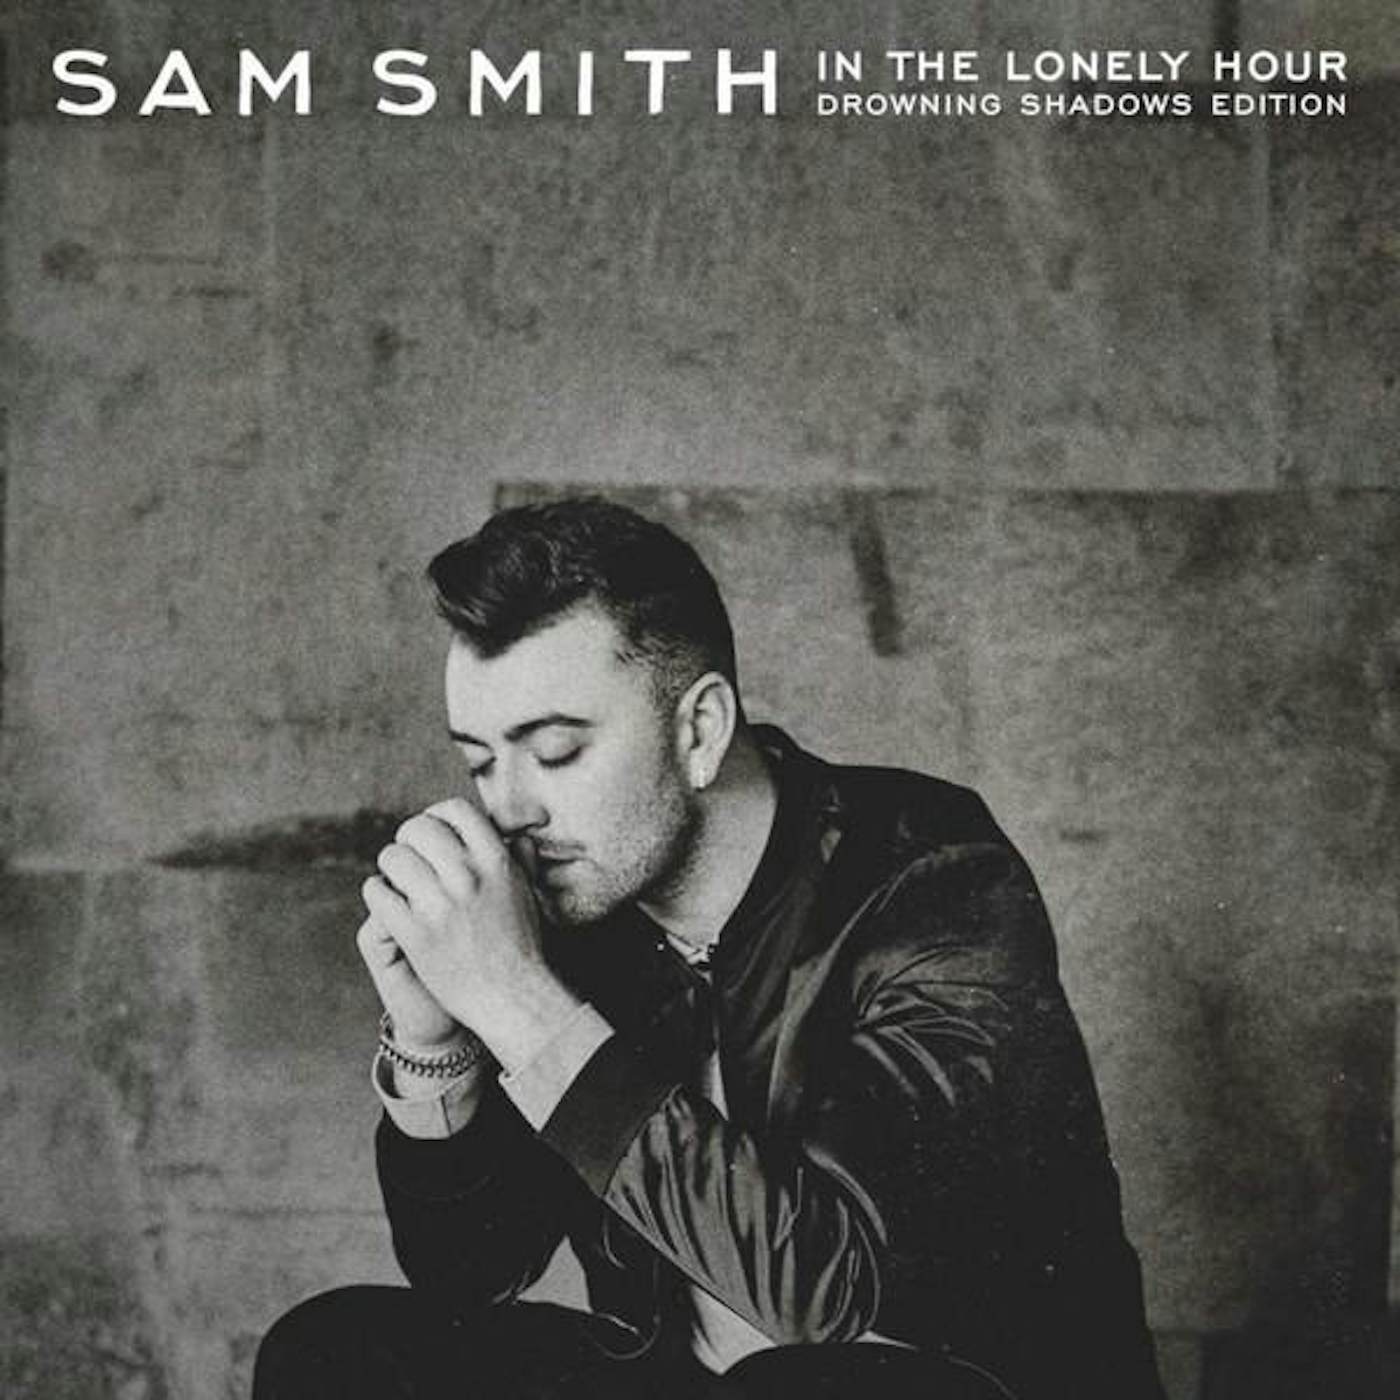 Sam Smith IN THE LONELY HOUR (DROWNING SHADOWS EDITION) Vinyl Record